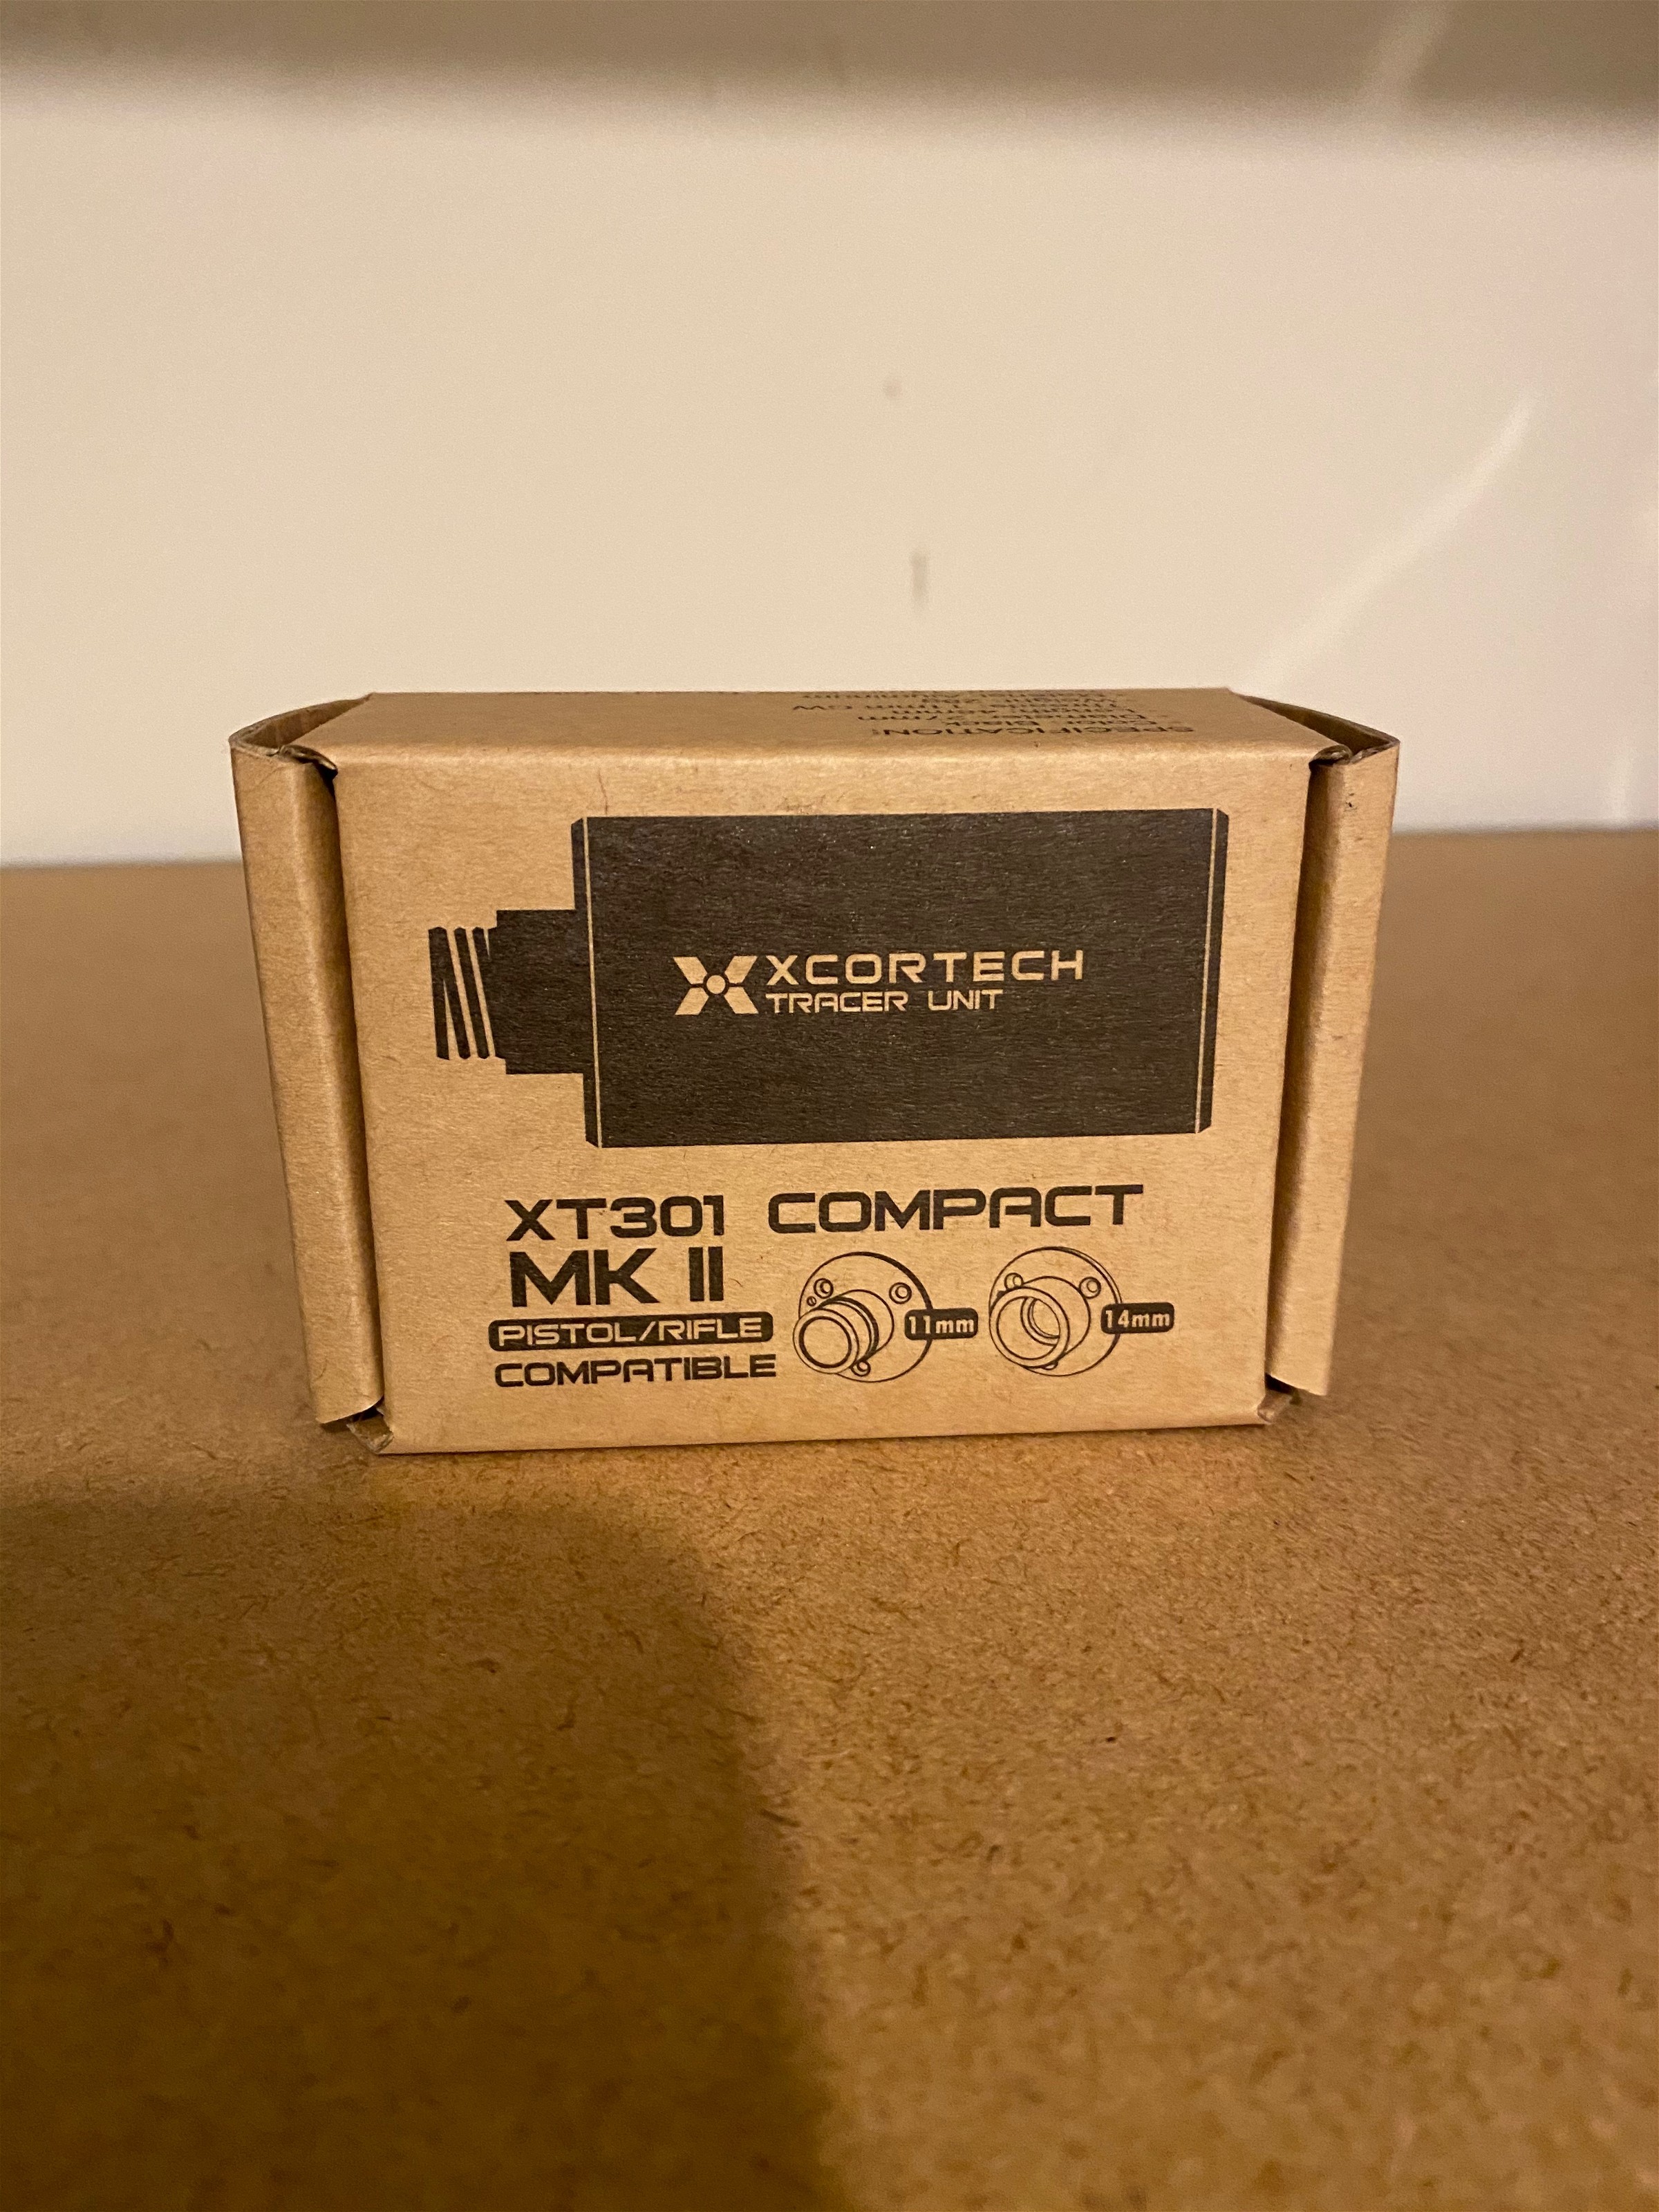 XCORTECH XT301 MK2 COMPACT AIRSOFT TRACER UNIT - BLACK. NIEUW ...